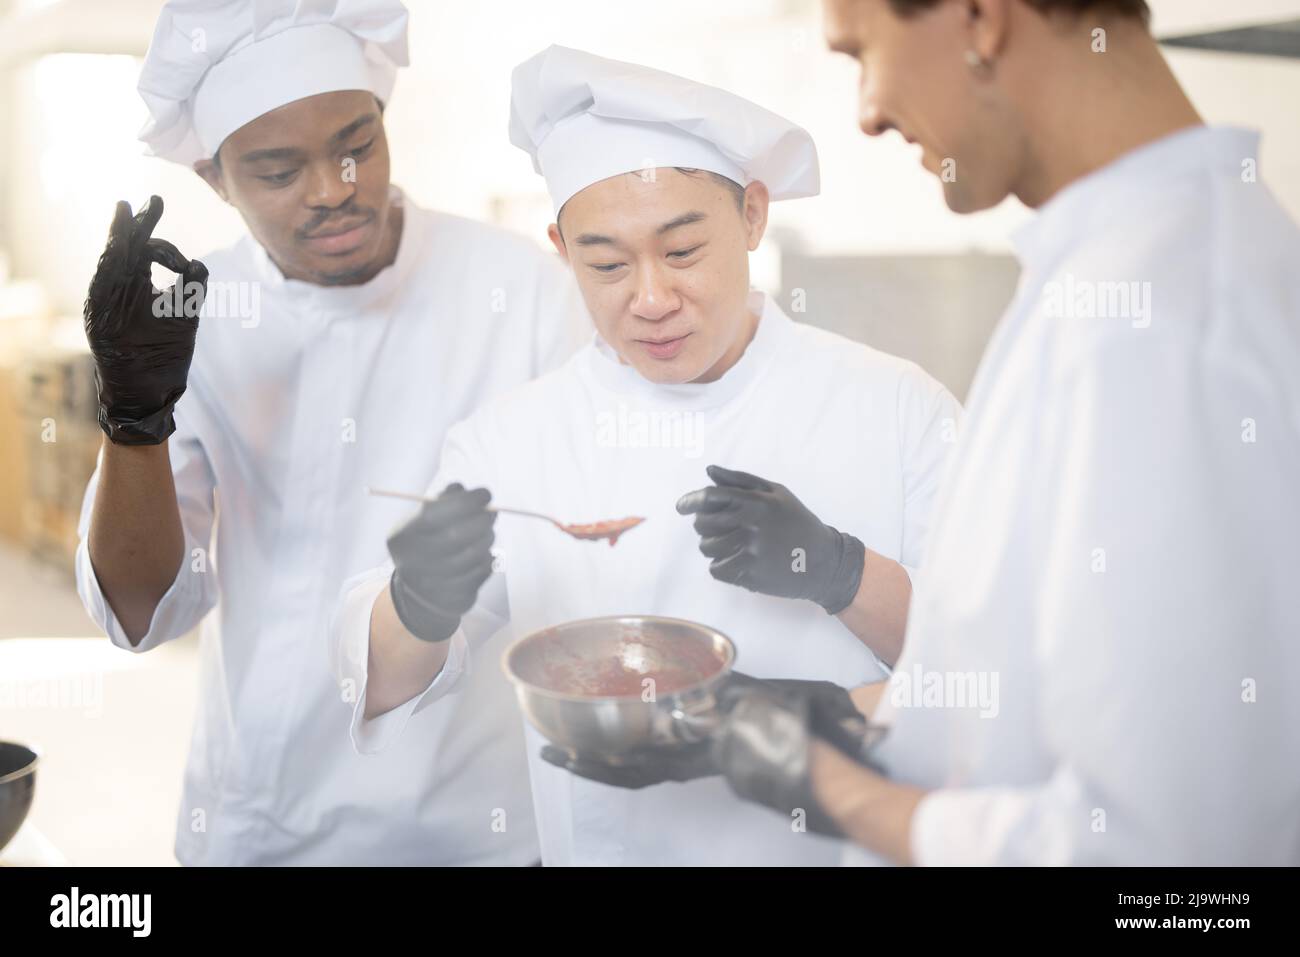 https://c8.alamy.com/comp/2J9WHN9/three-chef-cooks-with-different-ethnicities-tasting-sauce-with-a-spoon-while-cooking-in-the-kitchen-teamwork-and-cooking-delicious-food-at-restaurant-2J9WHN9.jpg